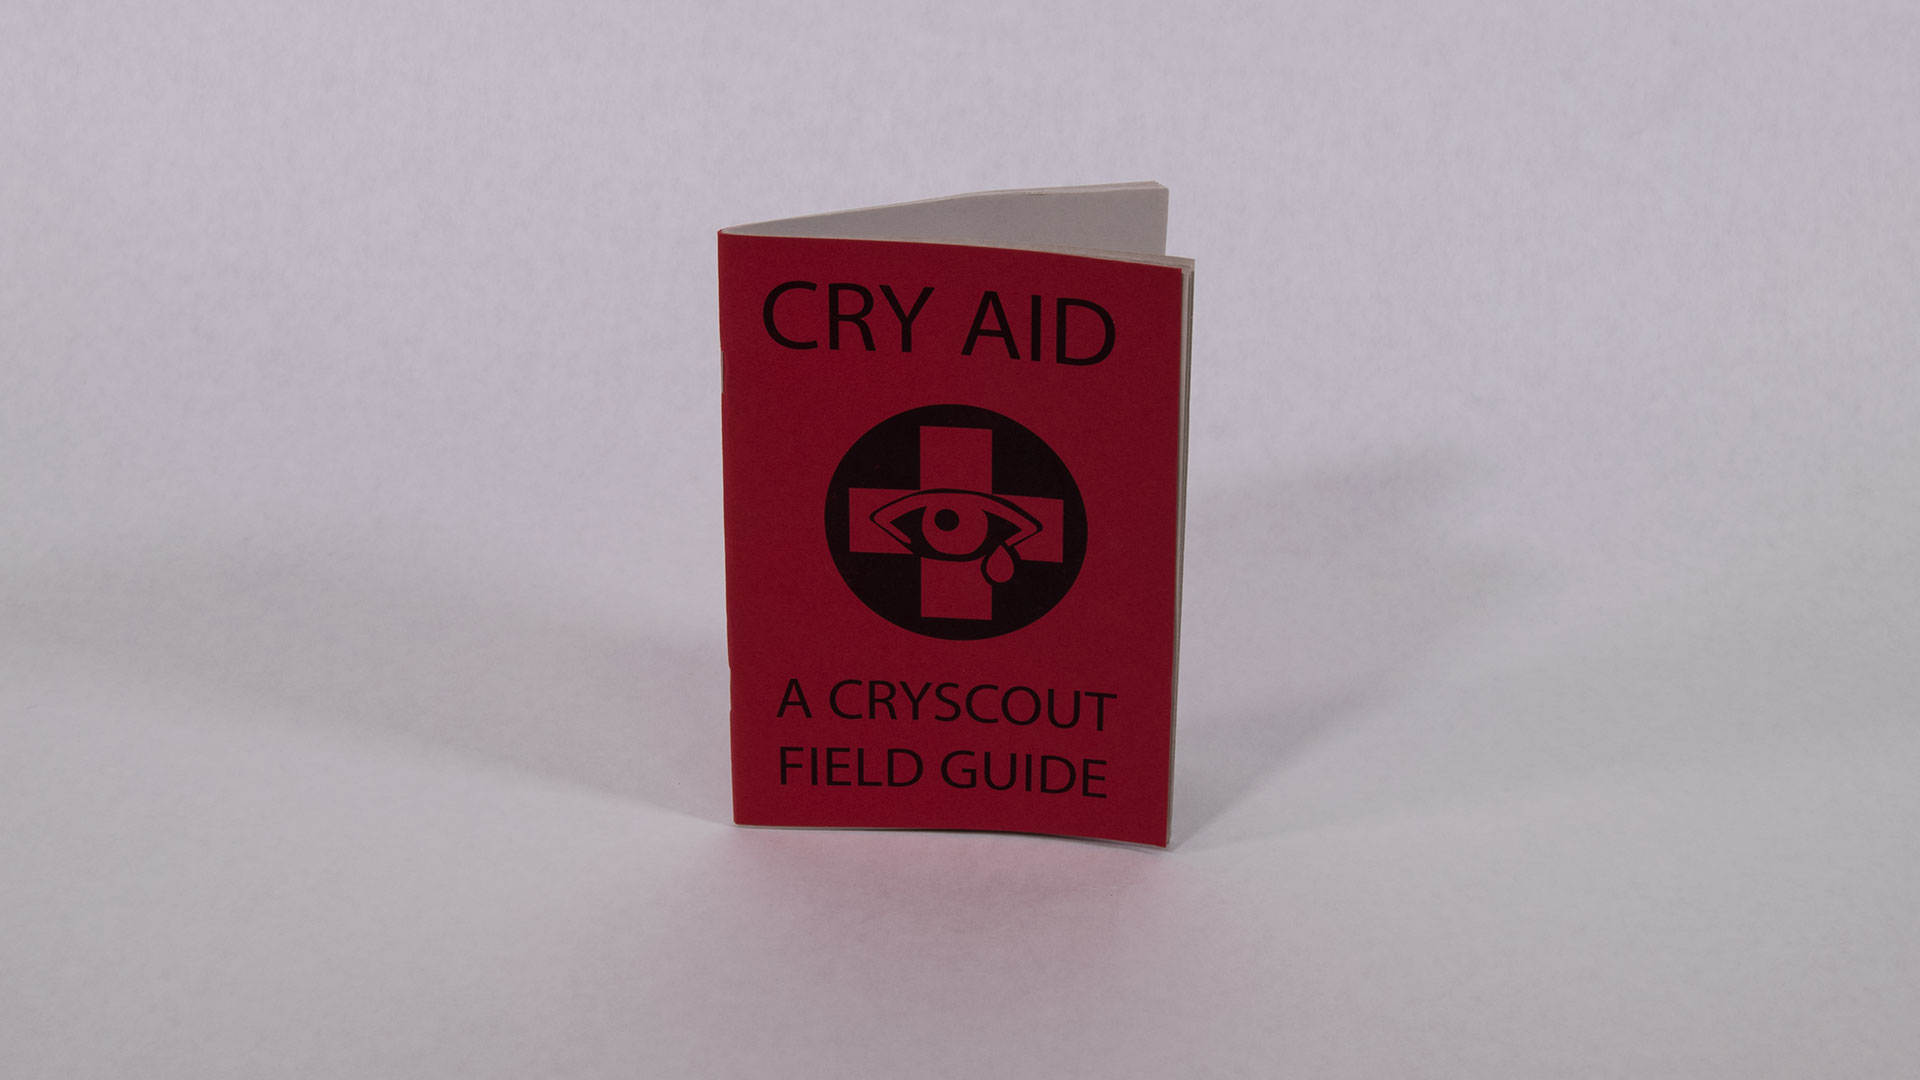   Cry Aid Field Guide    22 page illustrated zine  7" x 5"  2017   $4.99 &nbsp; Available on Etsy  